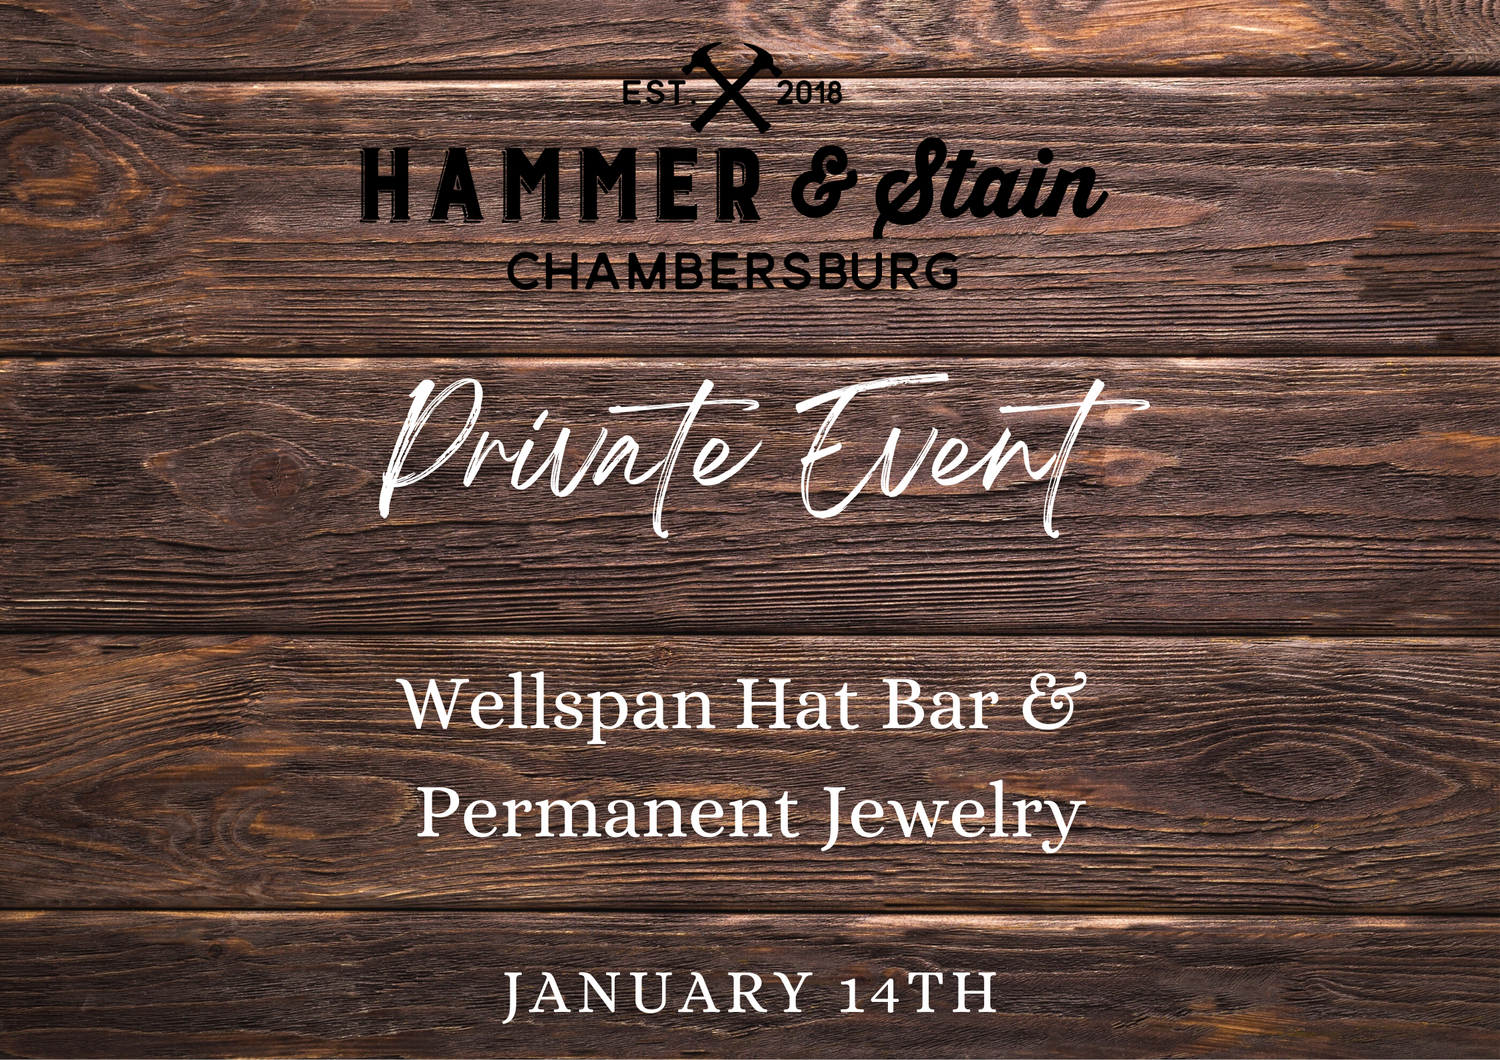 01/14/24 WellSpan Build your own Brim Hat Bar & Permanent Jewelry Event 2p-4p